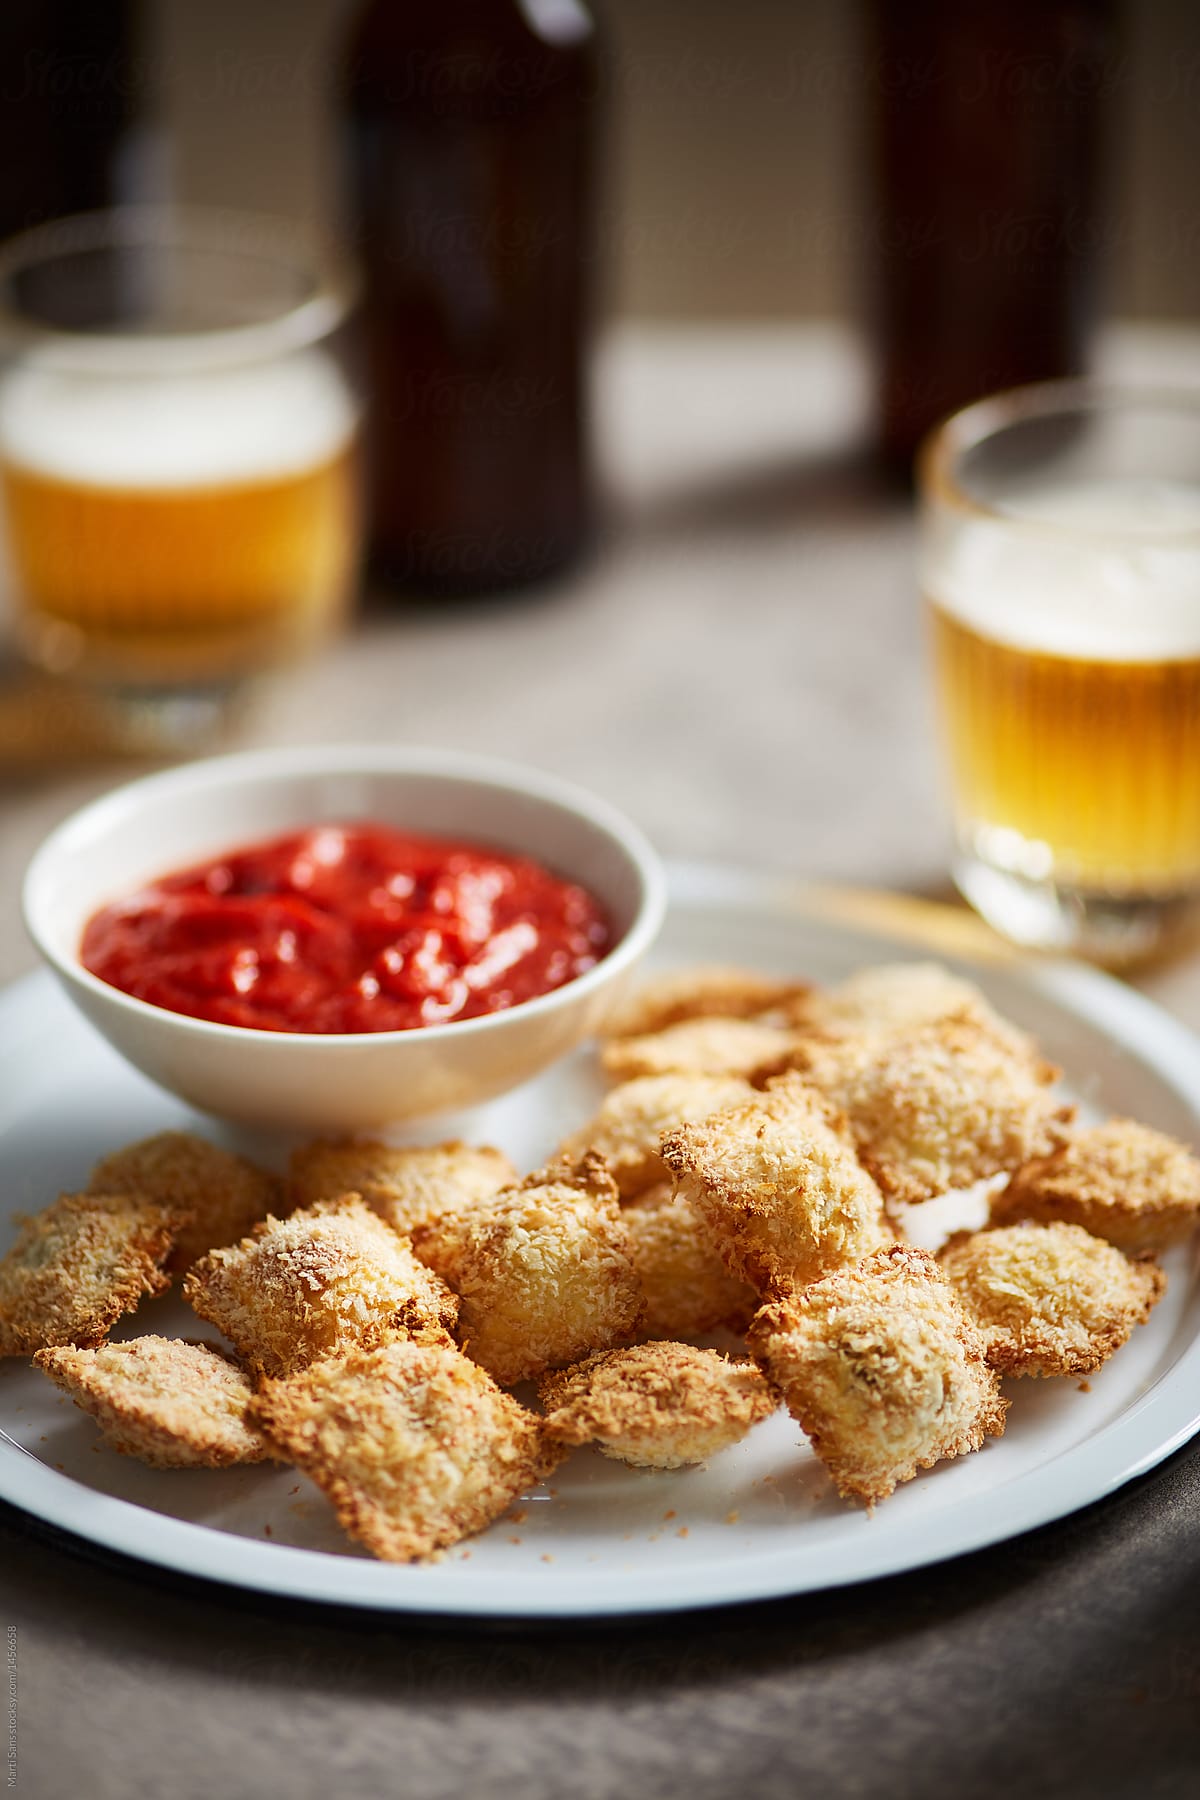 Homemade fried ravioli with sauce and beer.